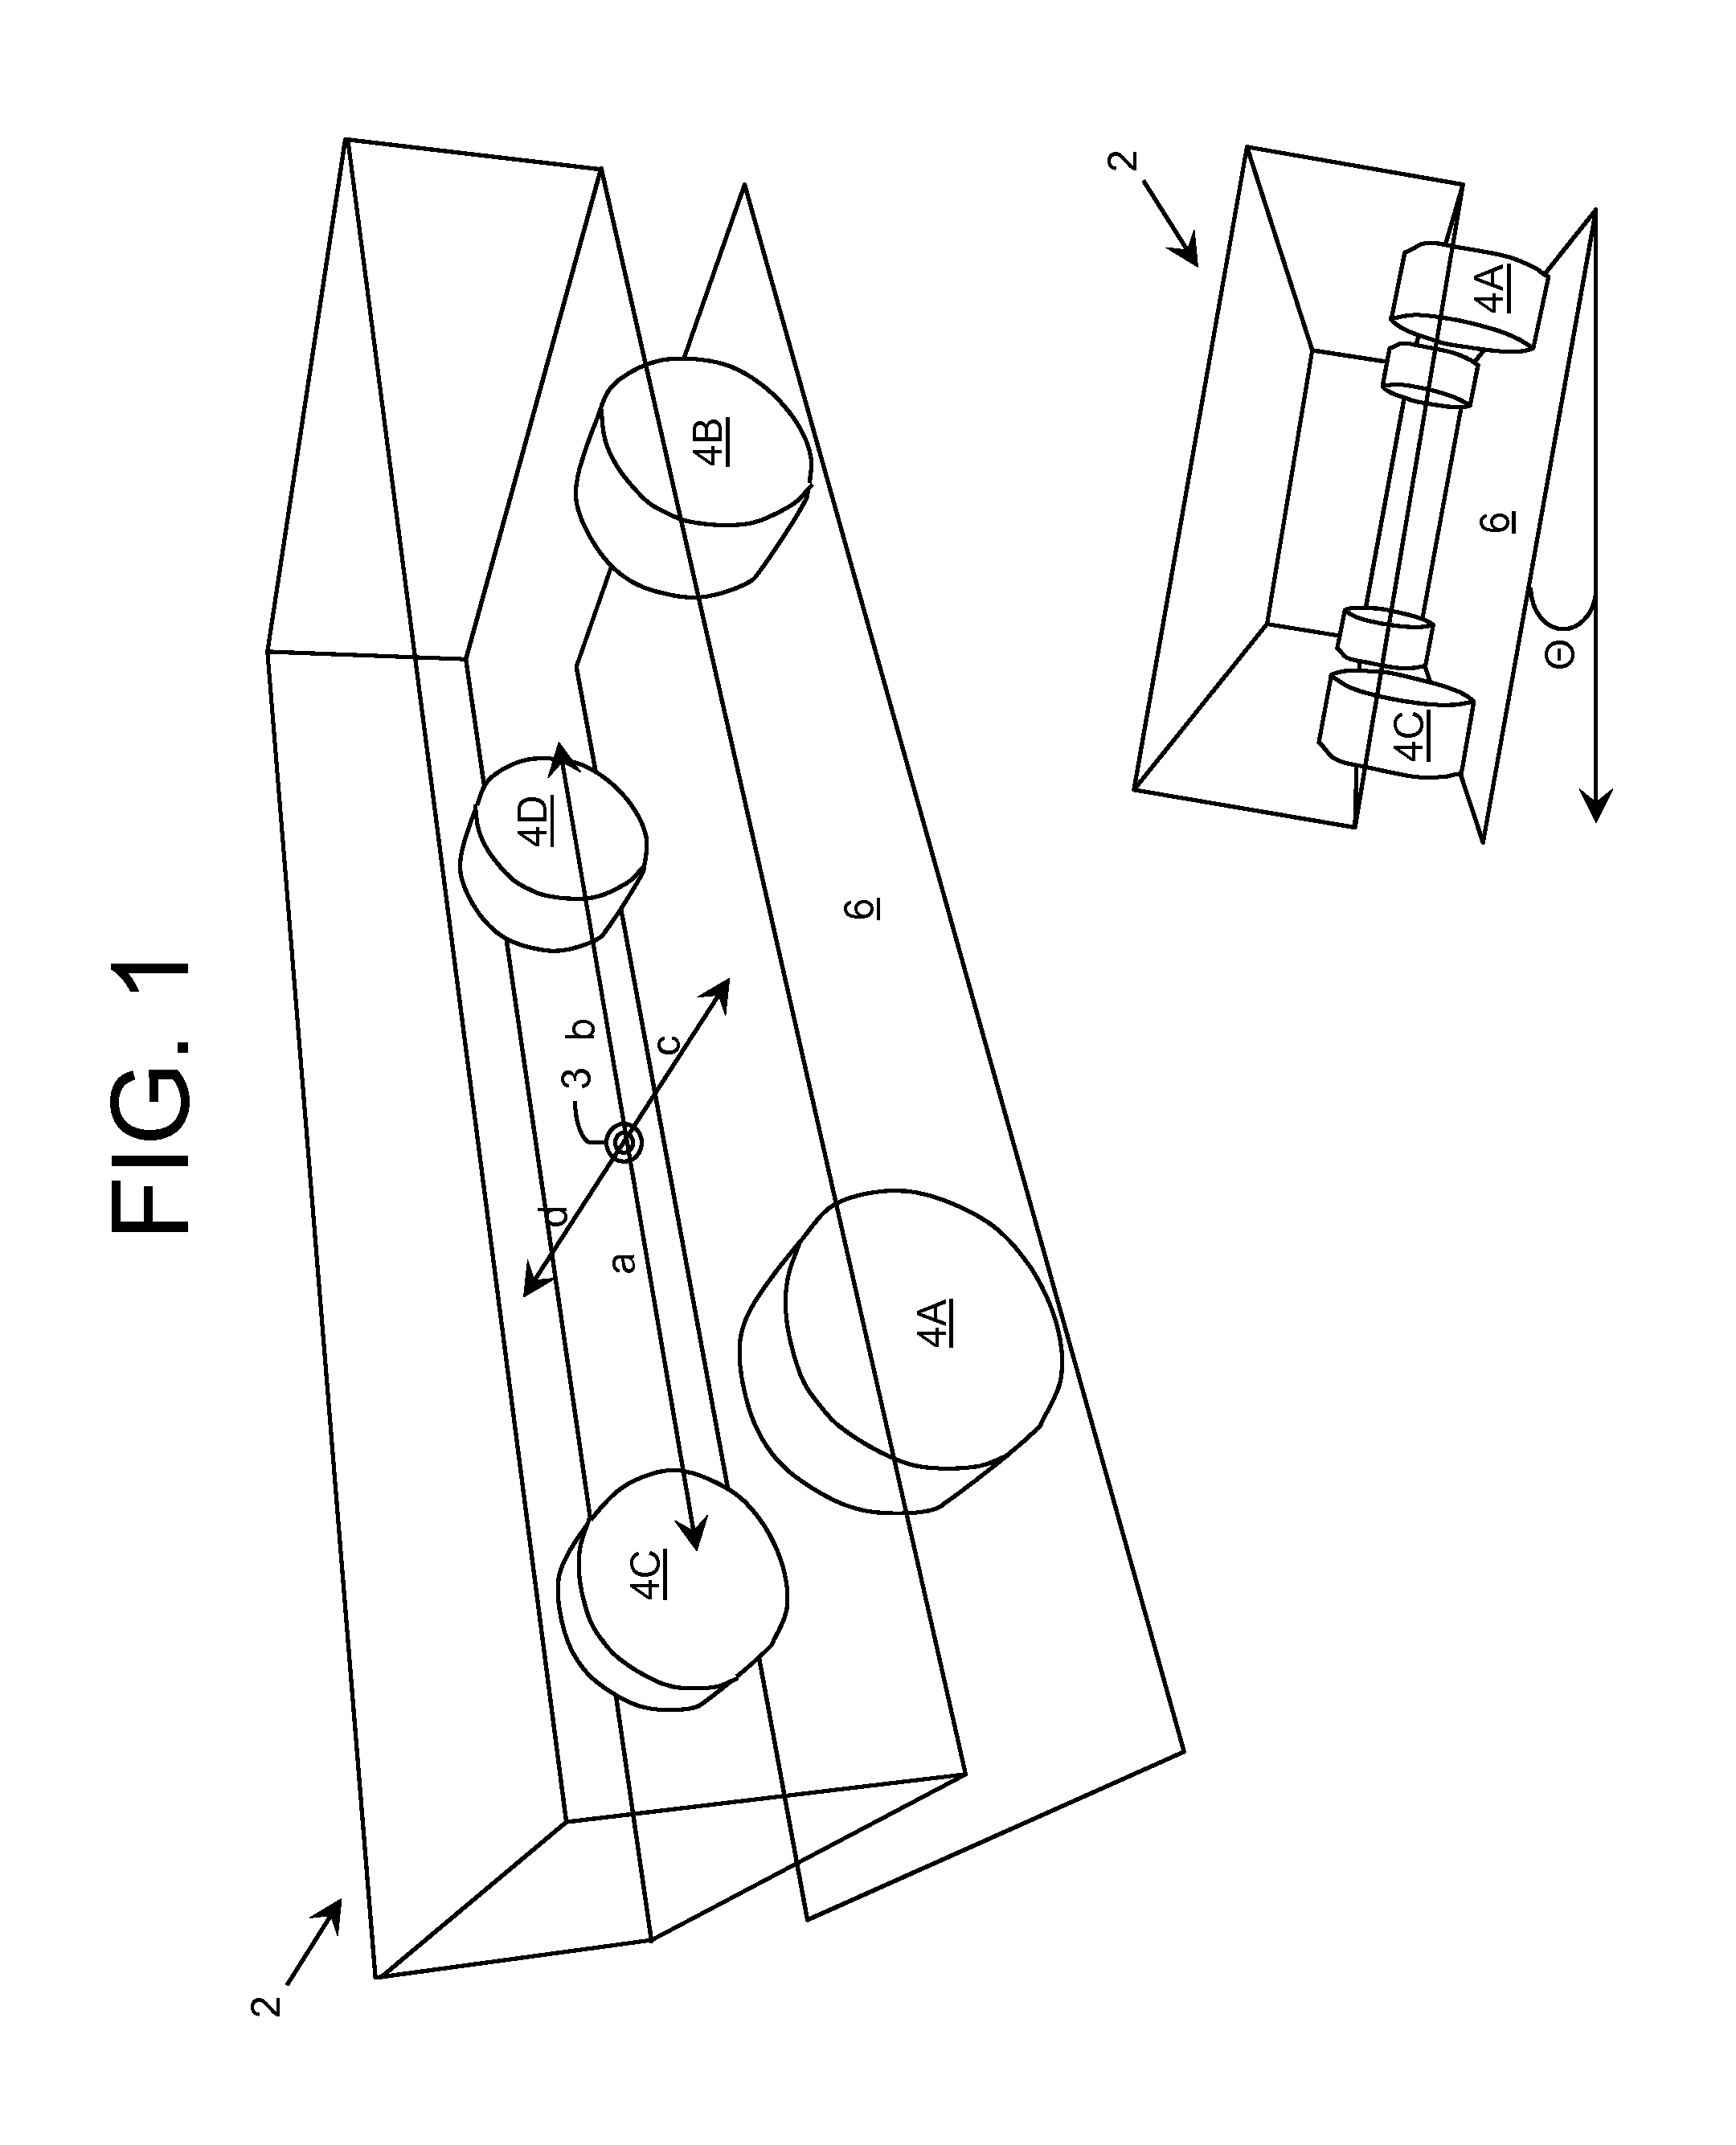 Object evaluation accounting for motion-related dynamic forces